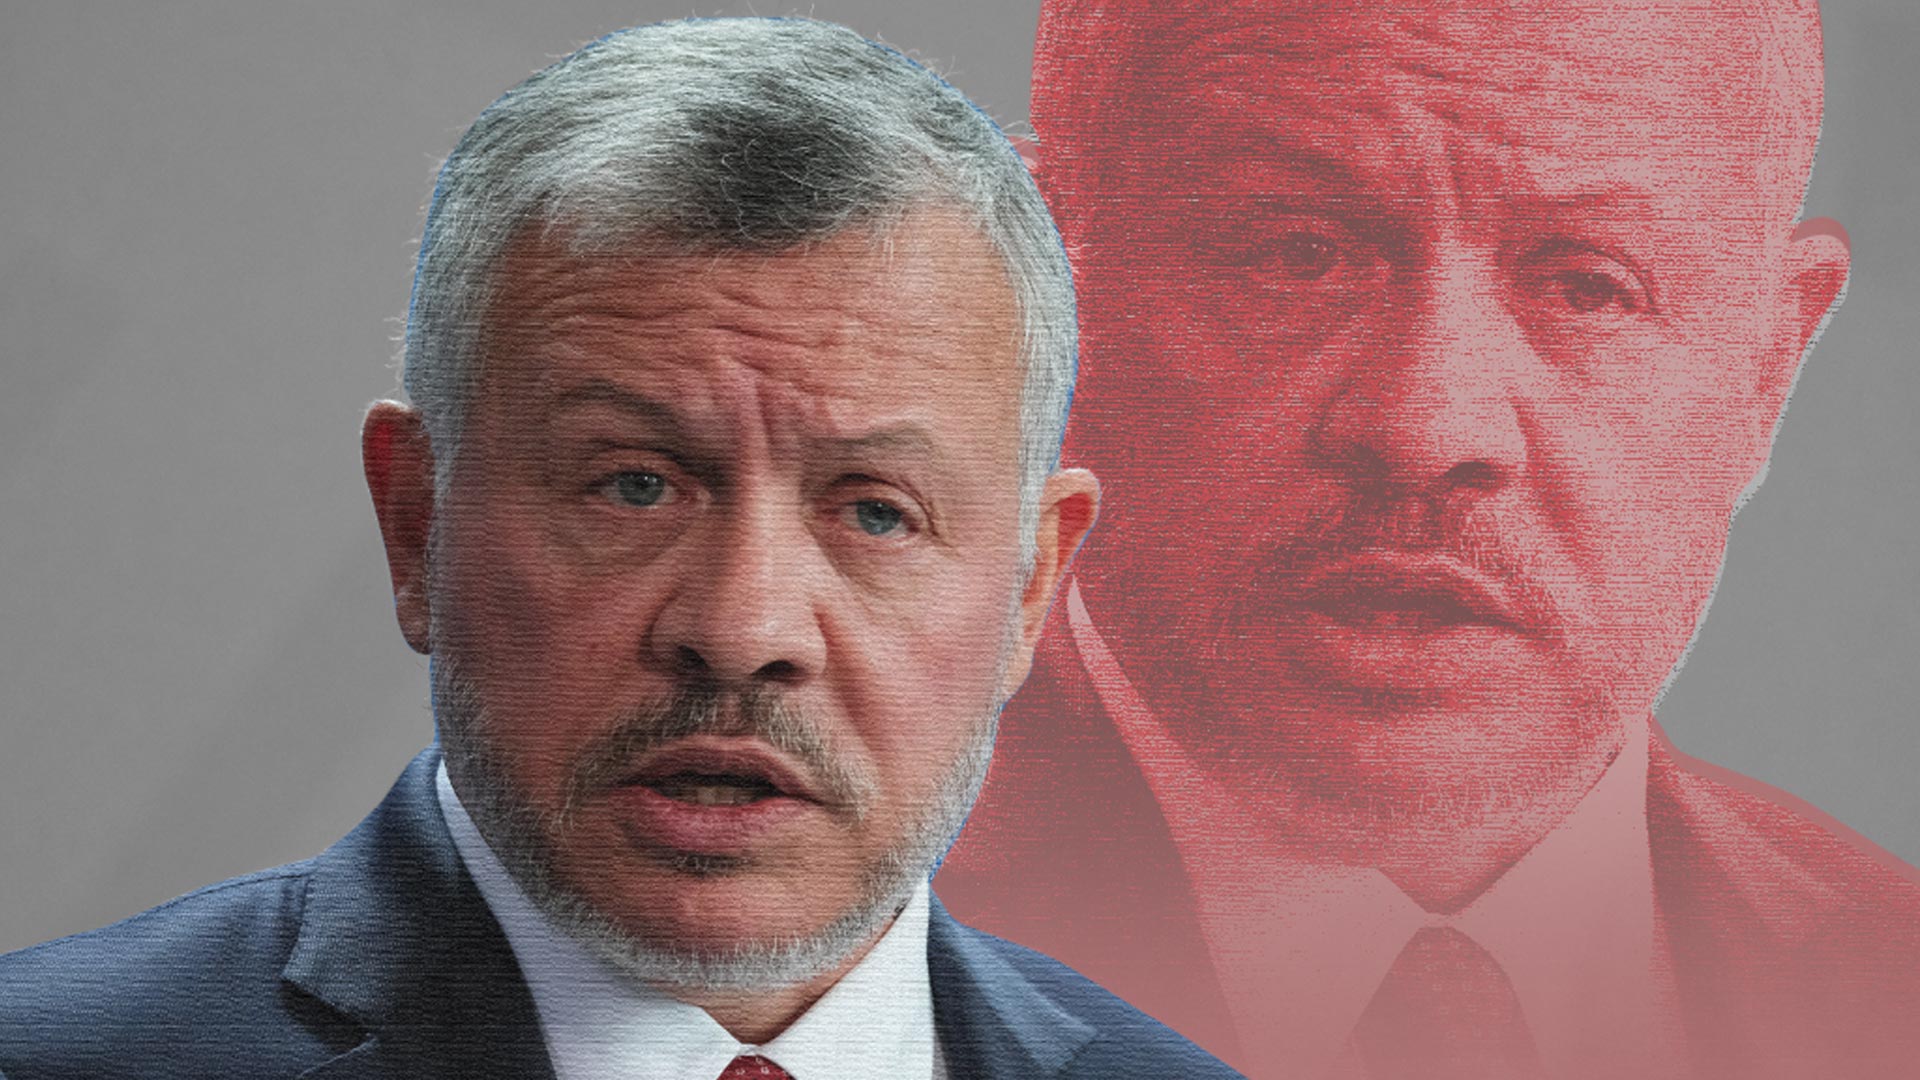 While foreign aid poured in, Jordan&#39;s King Abdullah funnelled $100m through secret companies to buy luxury US and UK homes - ICIJ